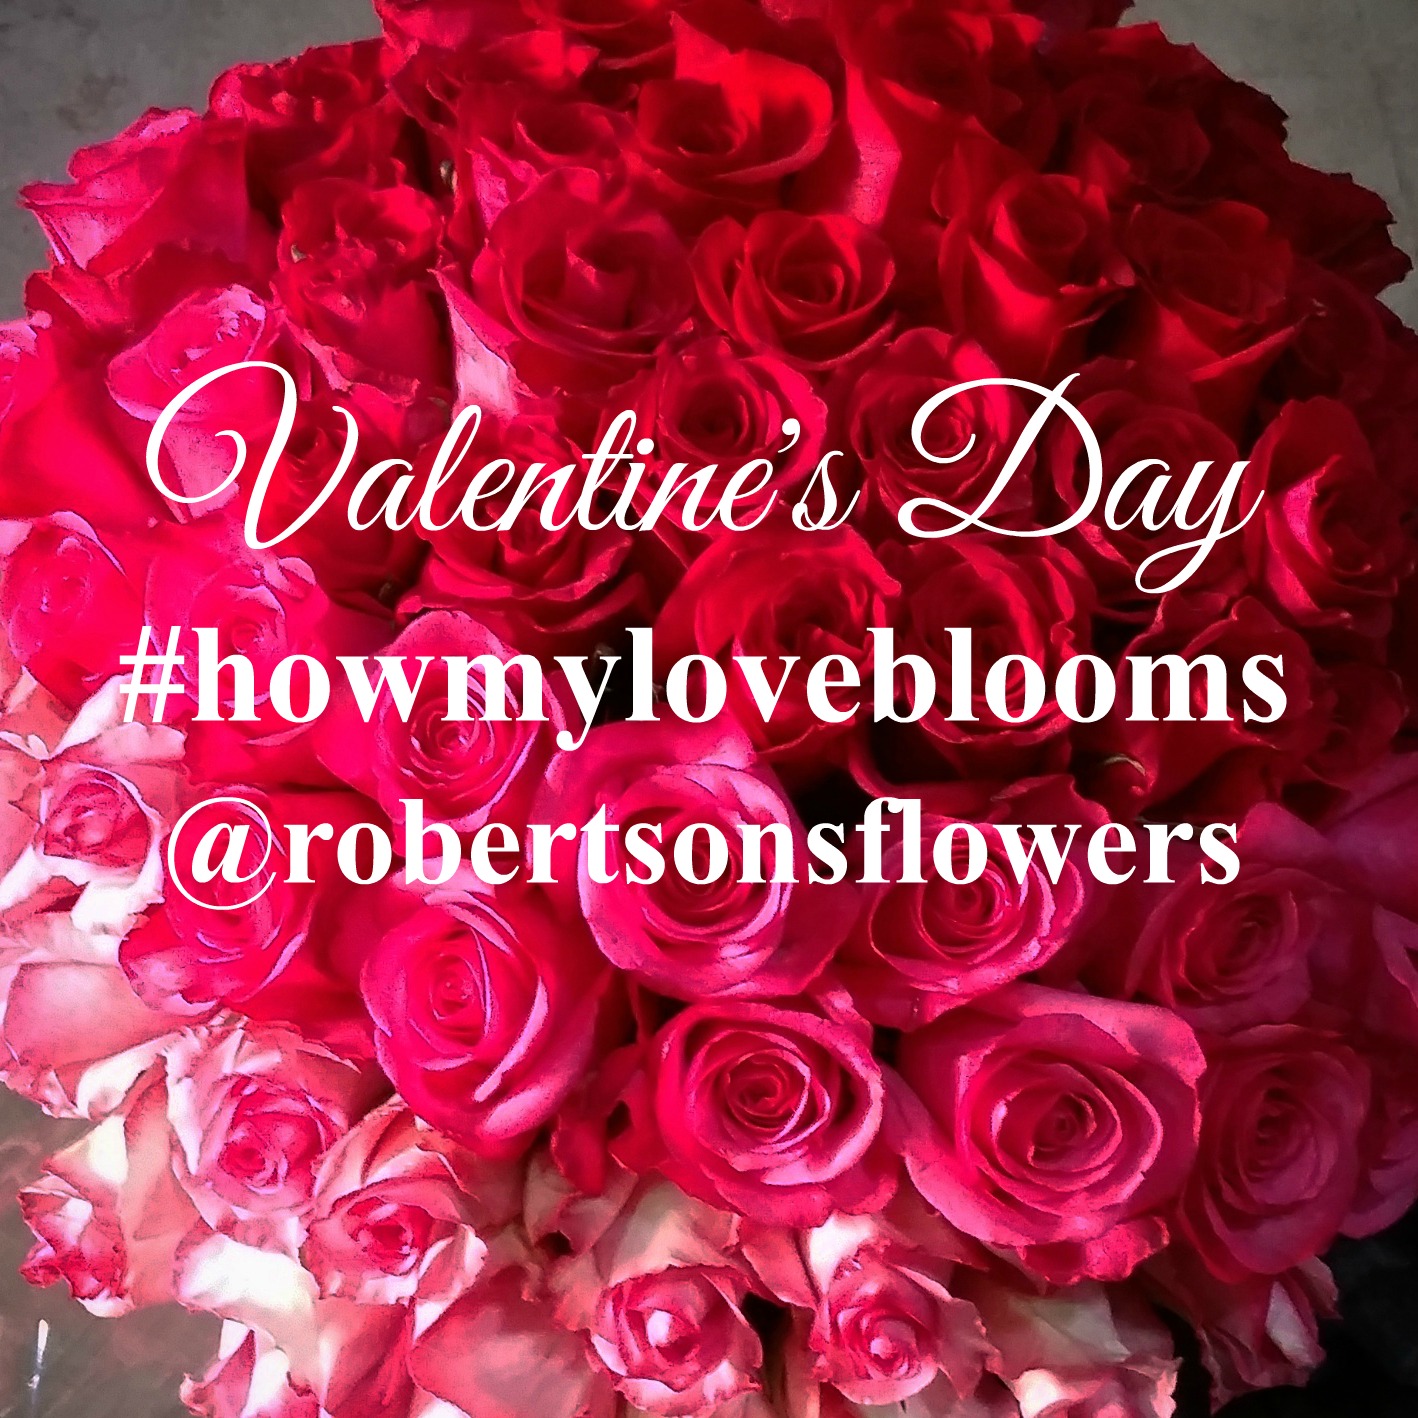 Share an original floral themed photo with us on Instagram, tag @robertsonsflowers and include #howmyloveblooms - 3 Winners chosen onnFebruary 11th to win a $100 Robertson's gift card - just in time for Valentines Day! Contest ends 2/10 at midnight.